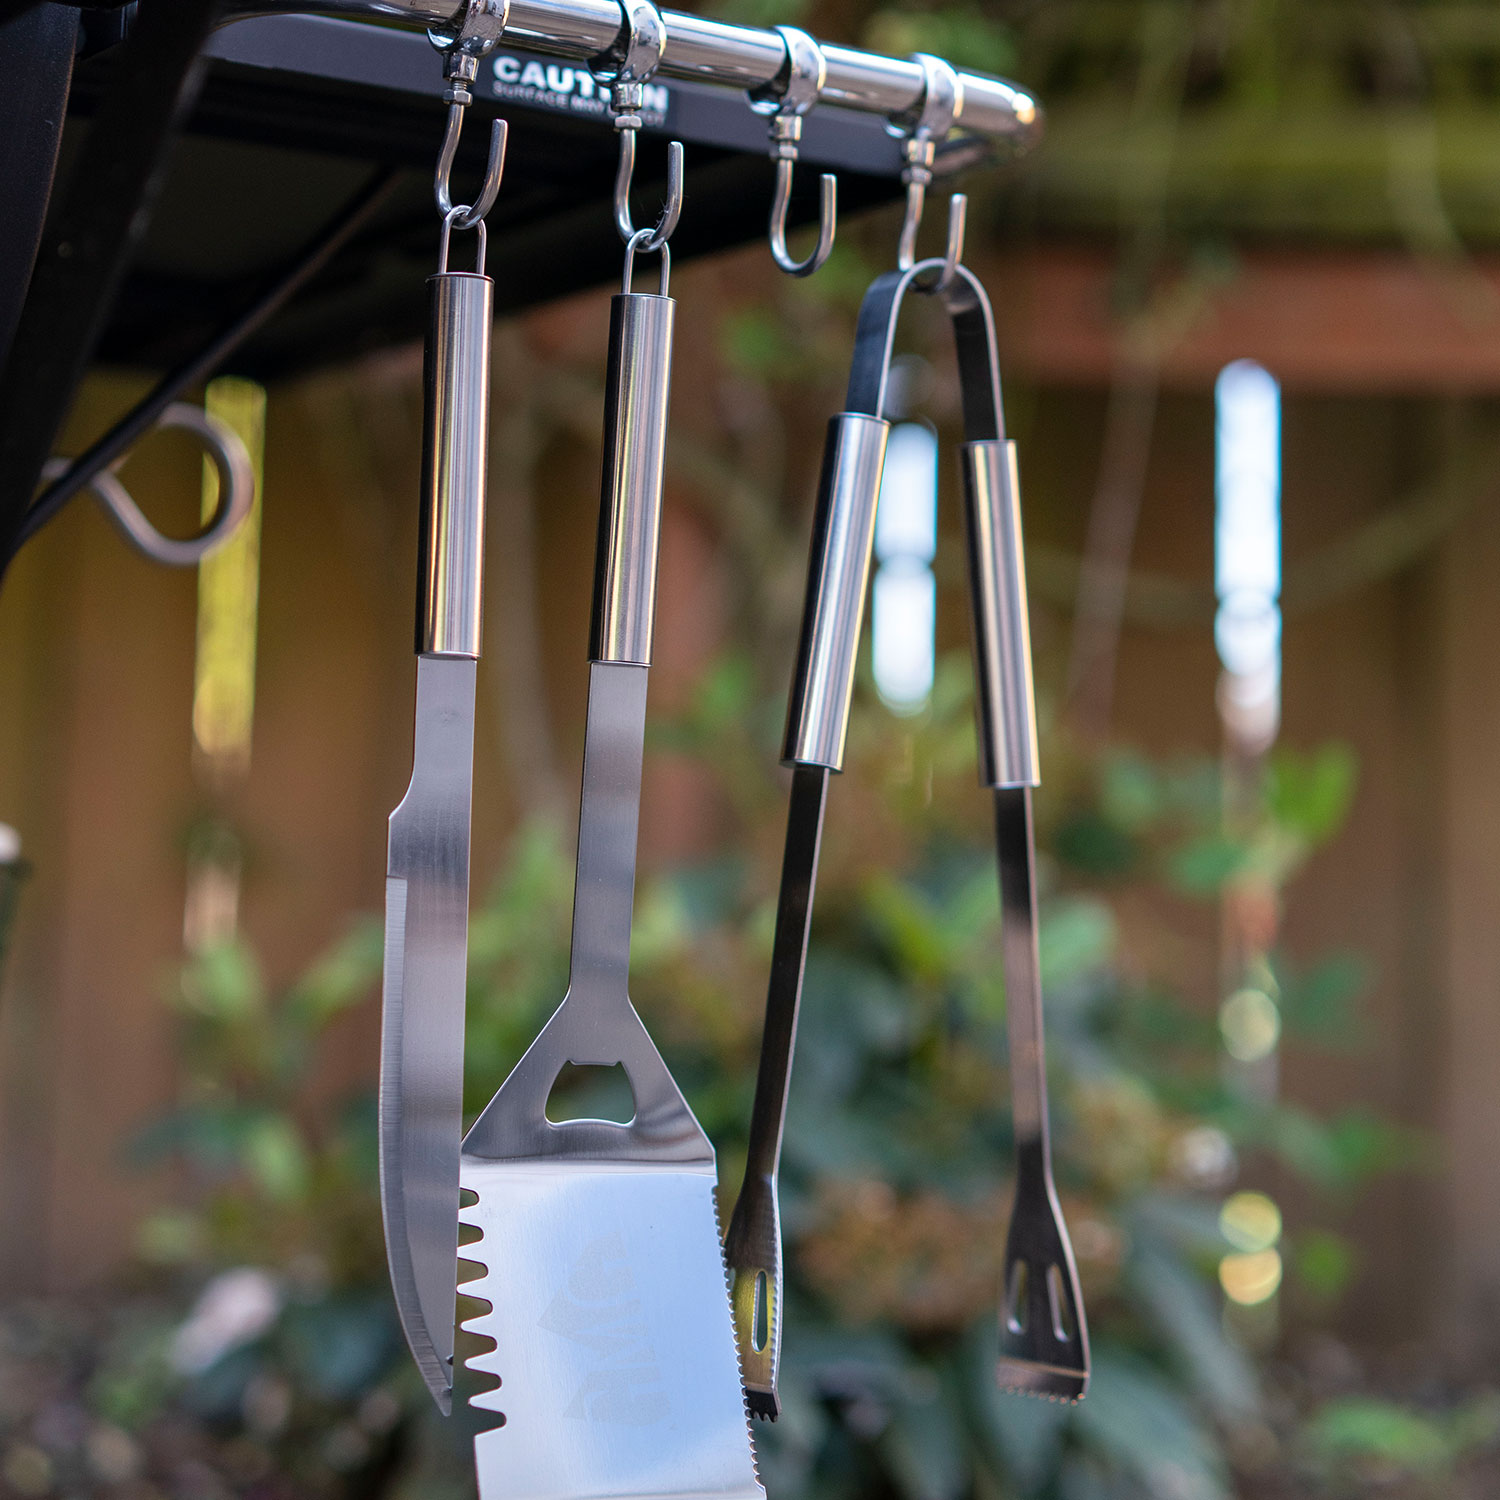 Grill Tools and Utensils